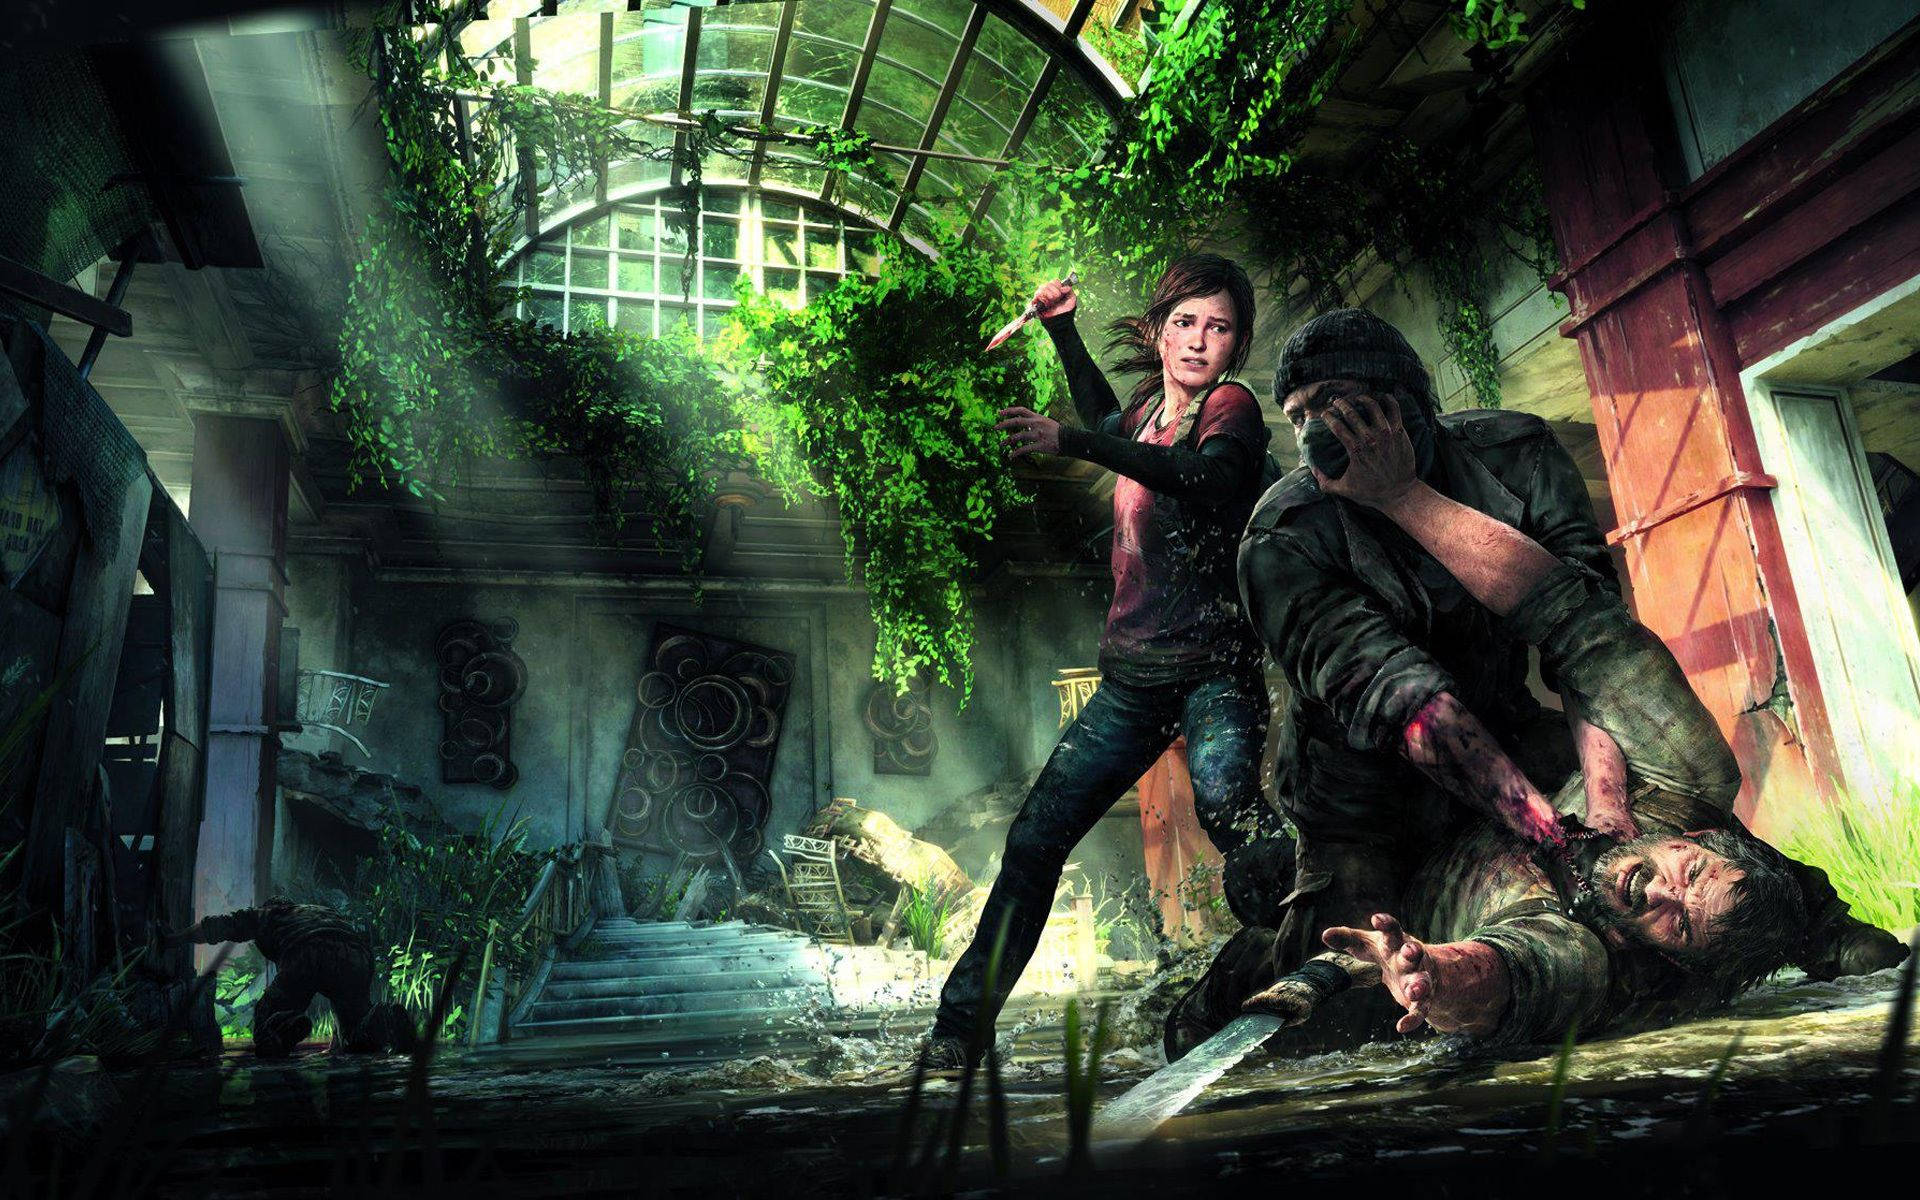 Joel and Ellie team up against the dangers of The Last Of Us. Wallpaper